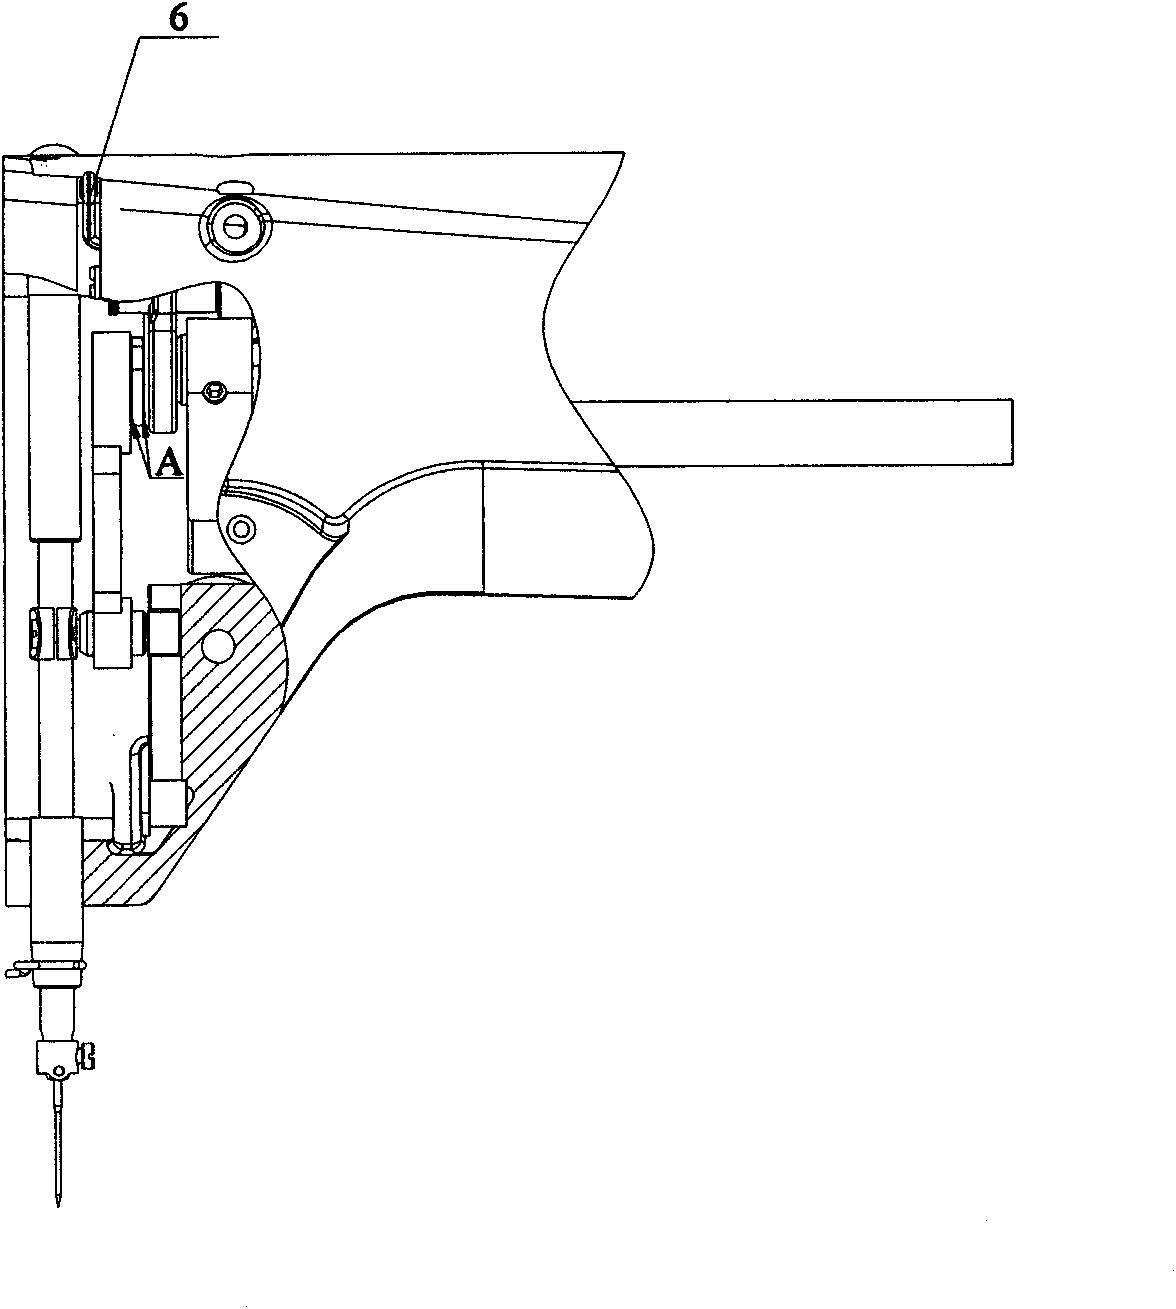 Anti-coiling mechanism of sewing machine